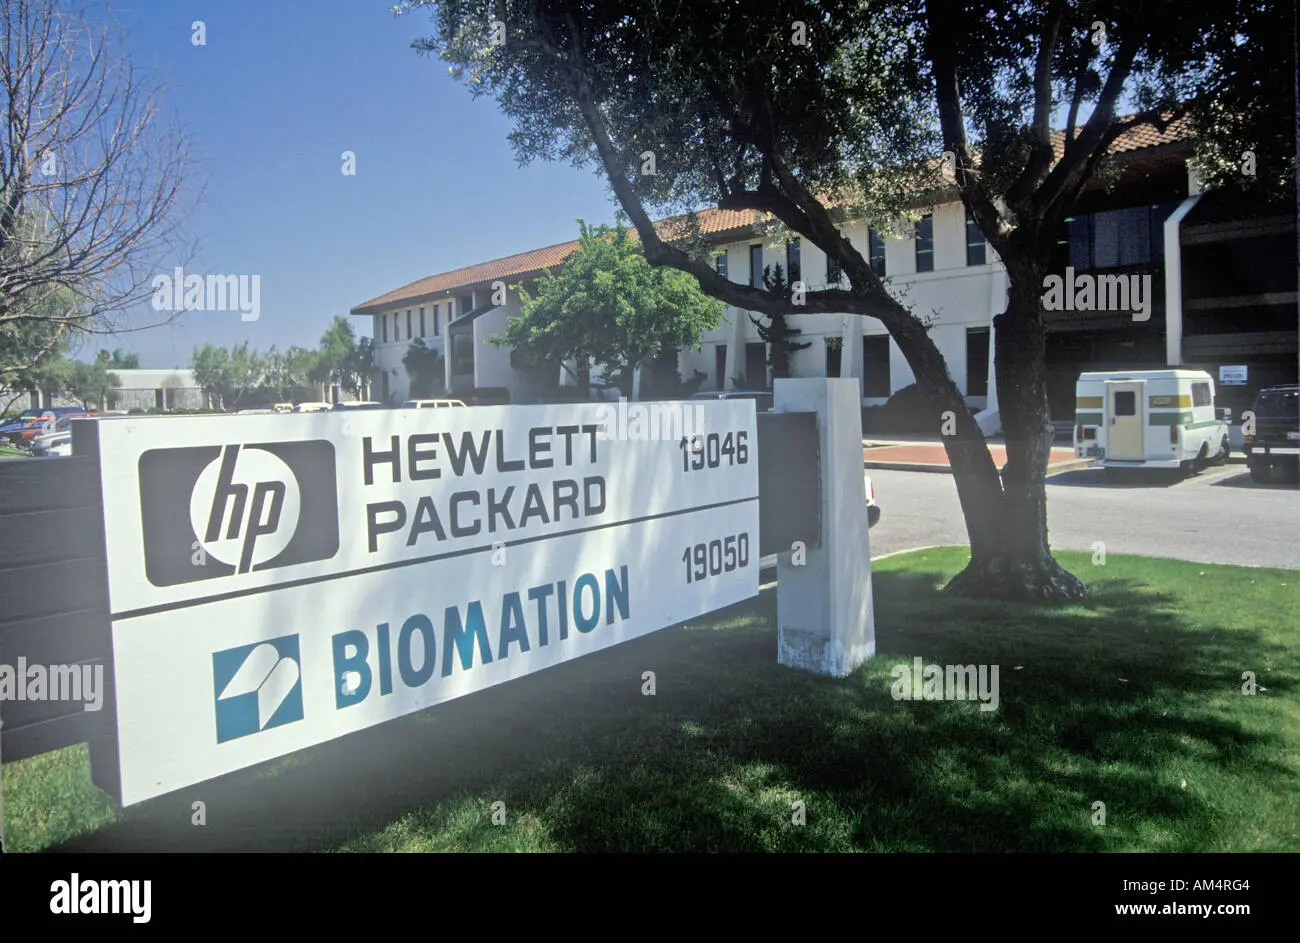 hewlett packard company cupertino california - How expensive is it to live in Cupertino